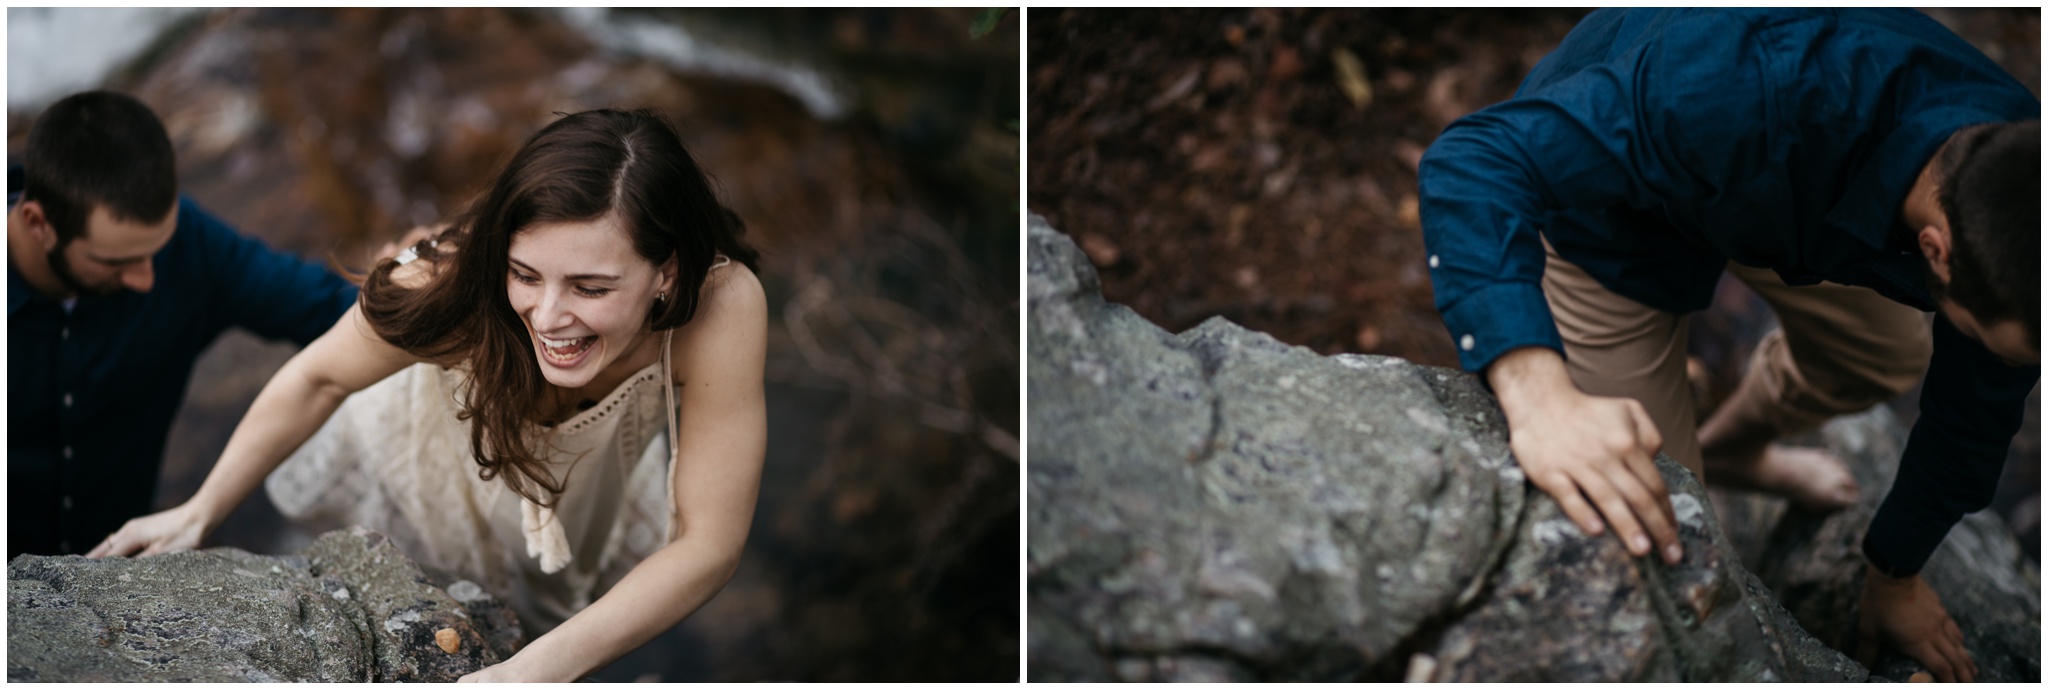 The Morros Photography Maddie and Jake Engagament session at Oak Mountain State Park Alabama_0103.jpg